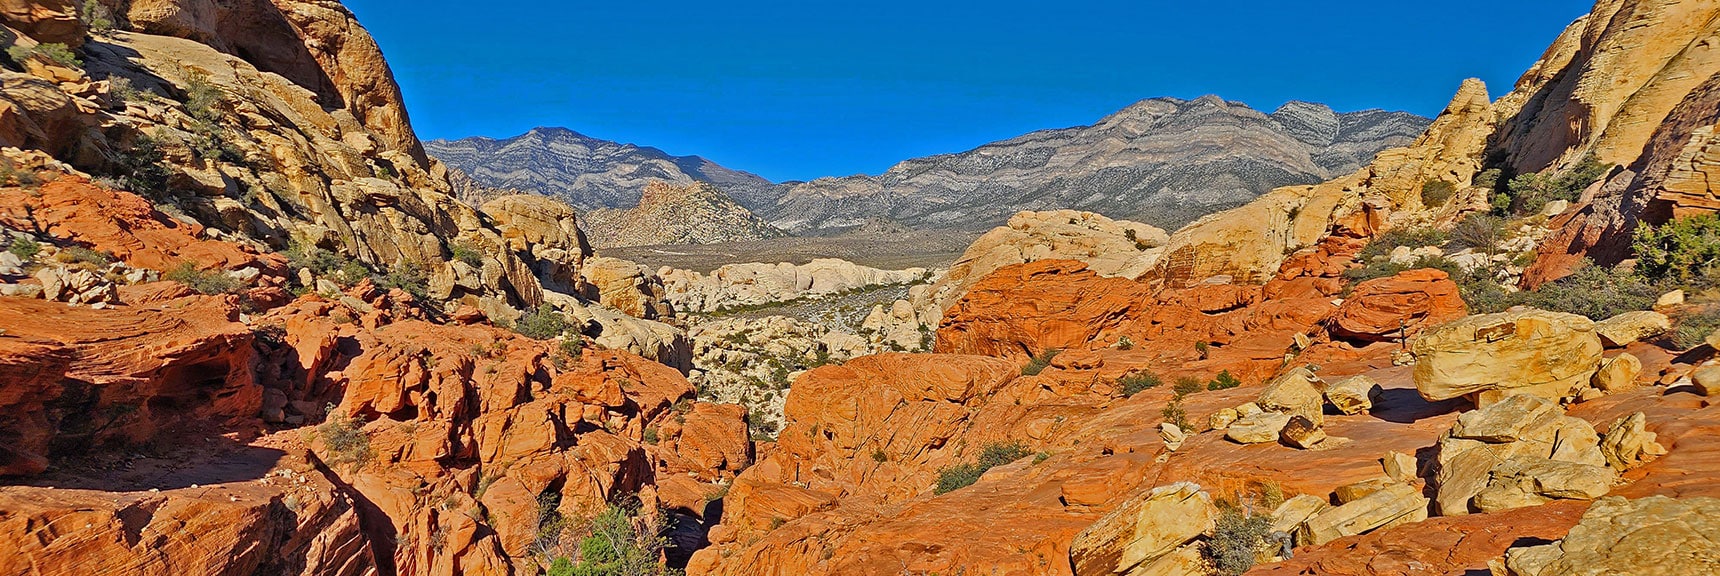 Higher Perspective of the Keystone Thrust Cliffs: El Bastardo Mt. to the Right. | Calico Tanks | Red Rock Canyon National Conservation Area, Nevada